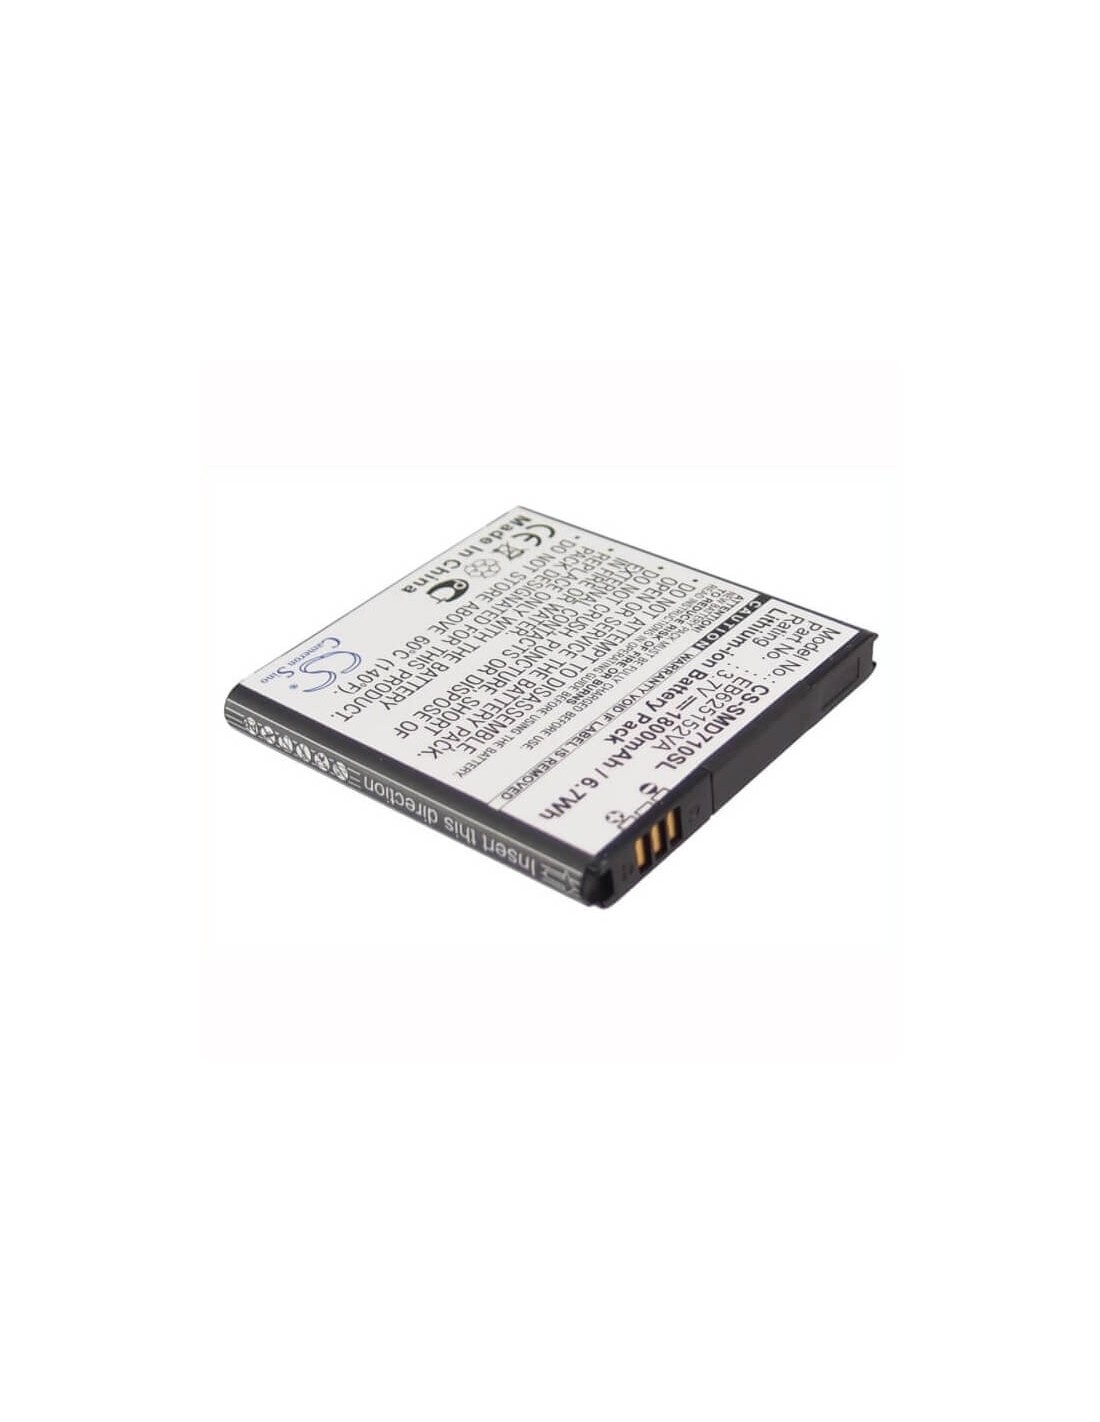 Battery for Samsung SPH-D710, SCH-I929, Galaxy SII DUO 3.7V, 1800mAh - 6.66Wh